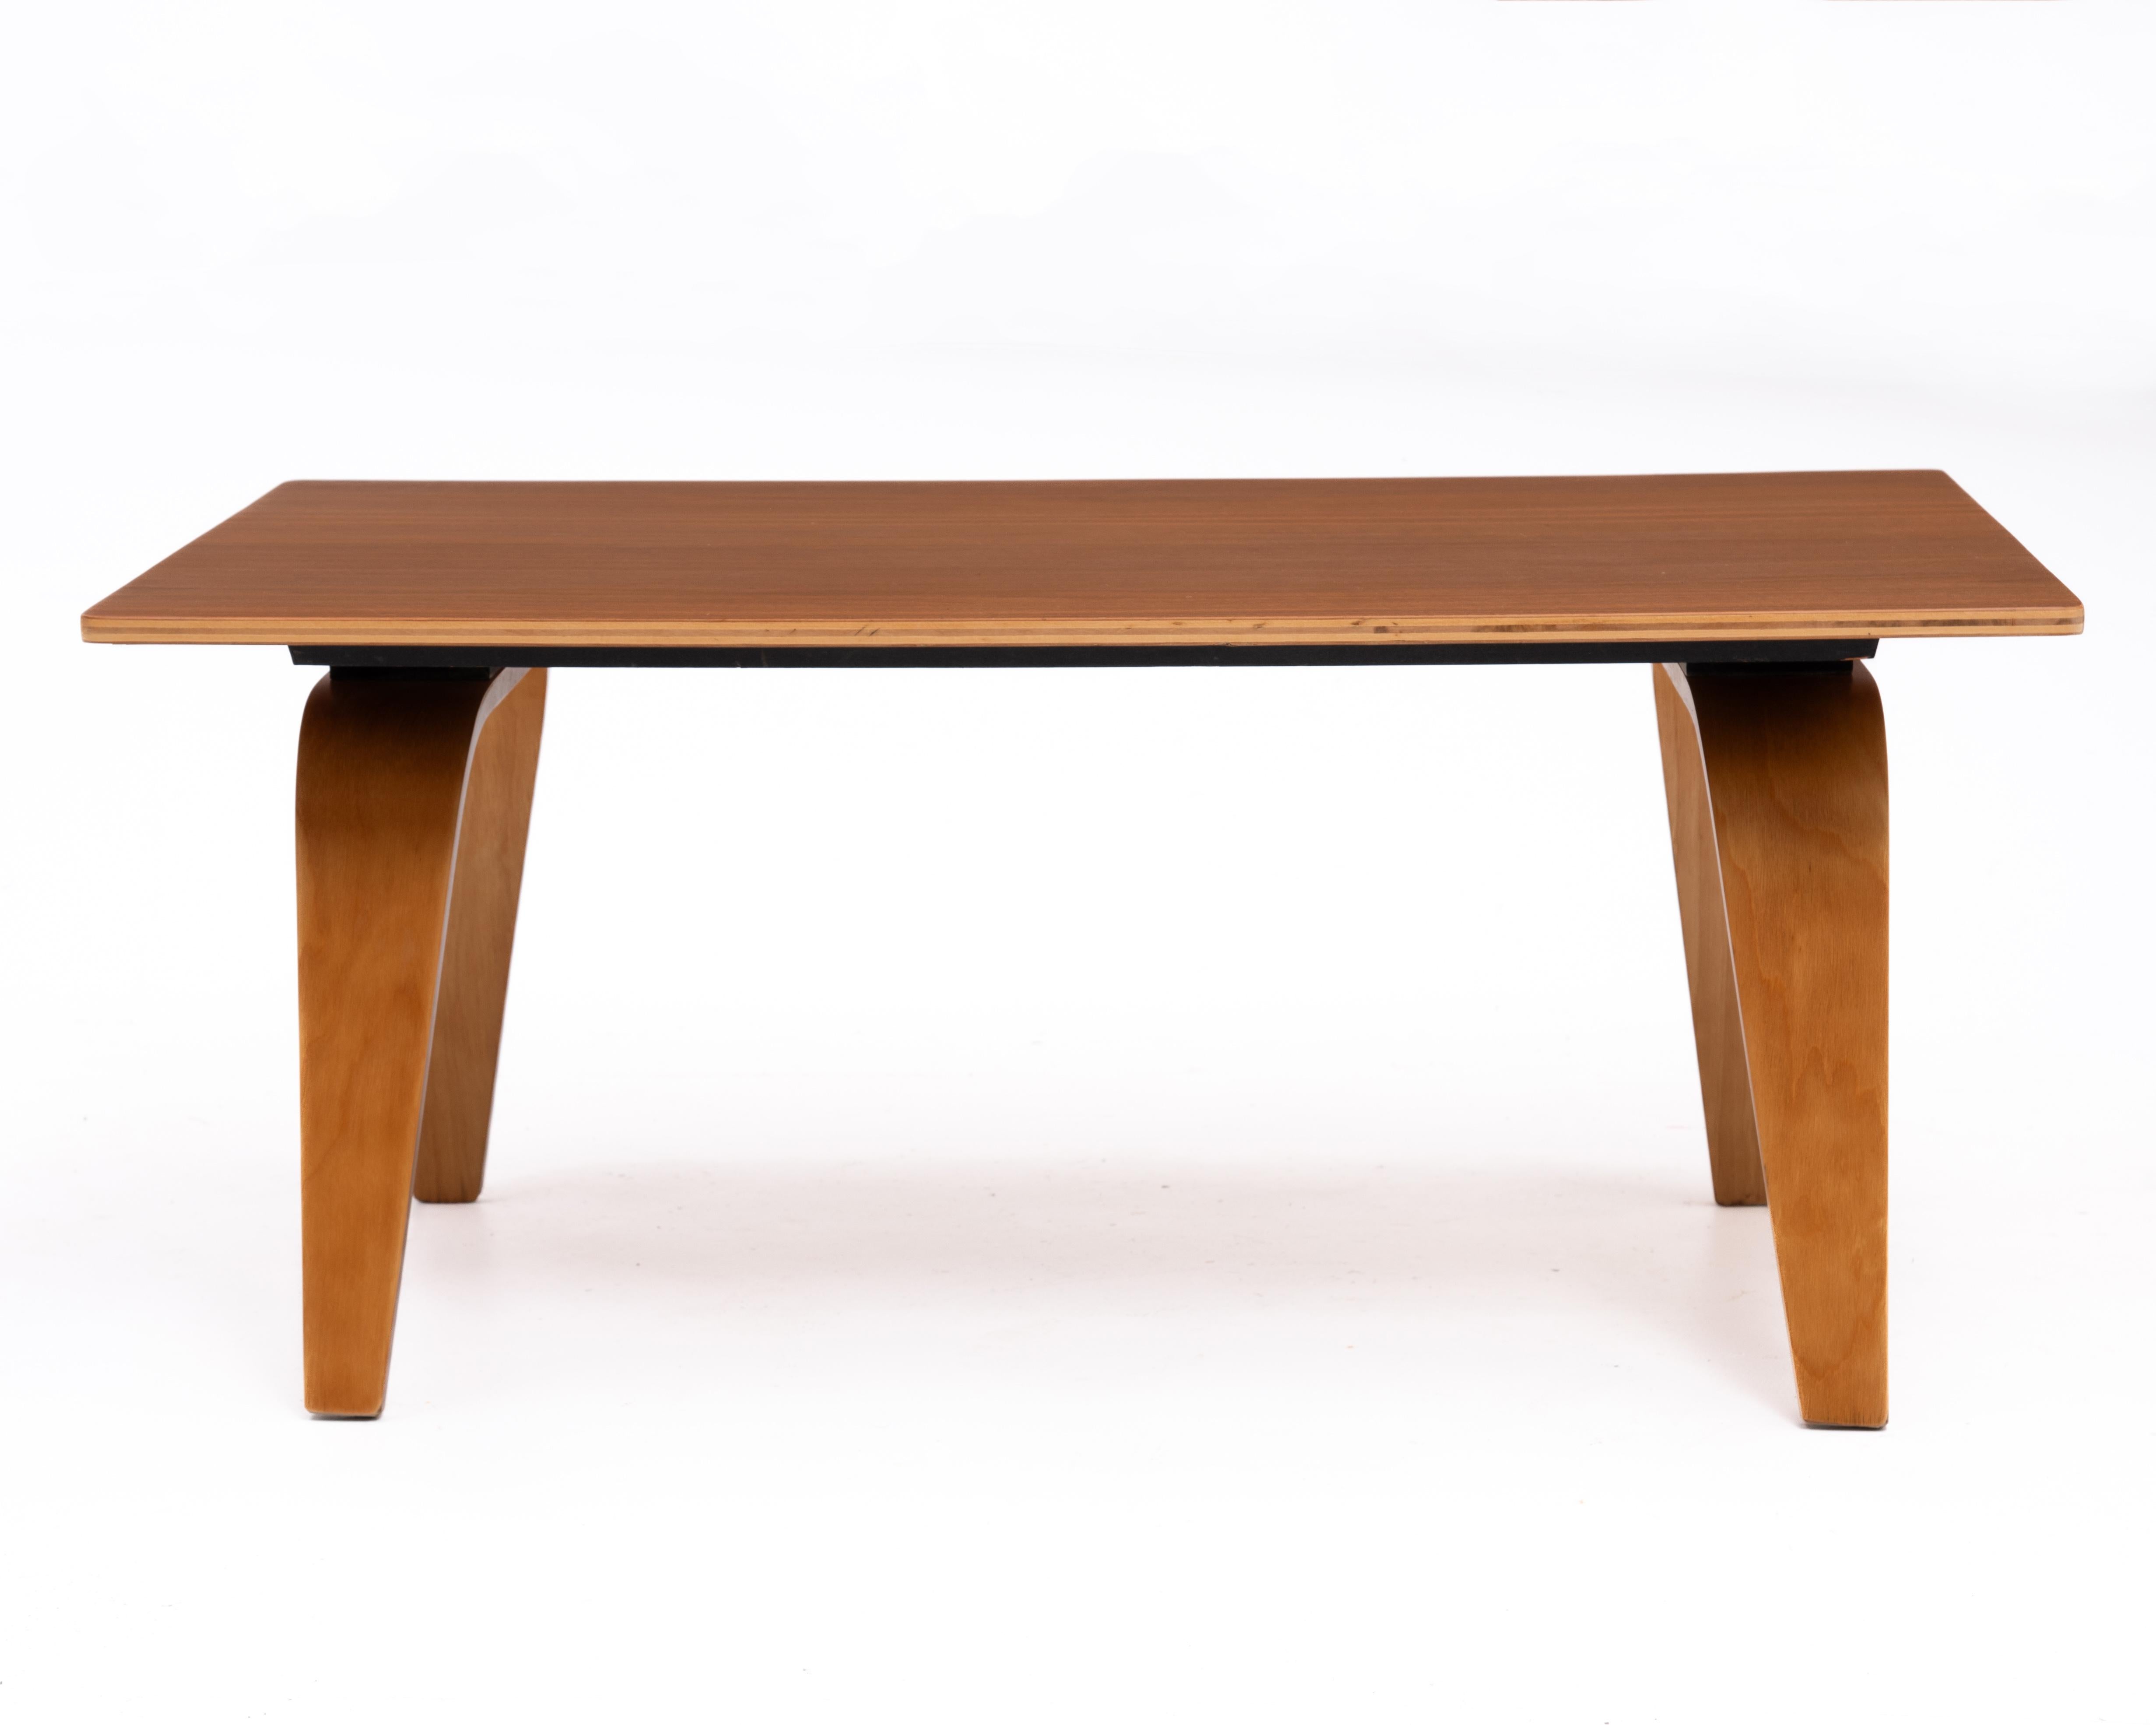 A rare Charles and Ray Eames CTW1 coffee table. An early version of the OTW (Oblong Table Wood) coffee table. The CTW1 was introduced in the 1940s and was first produced by Evans Plywood Company. The hand written ‘CTW-1’ helps identify this table as